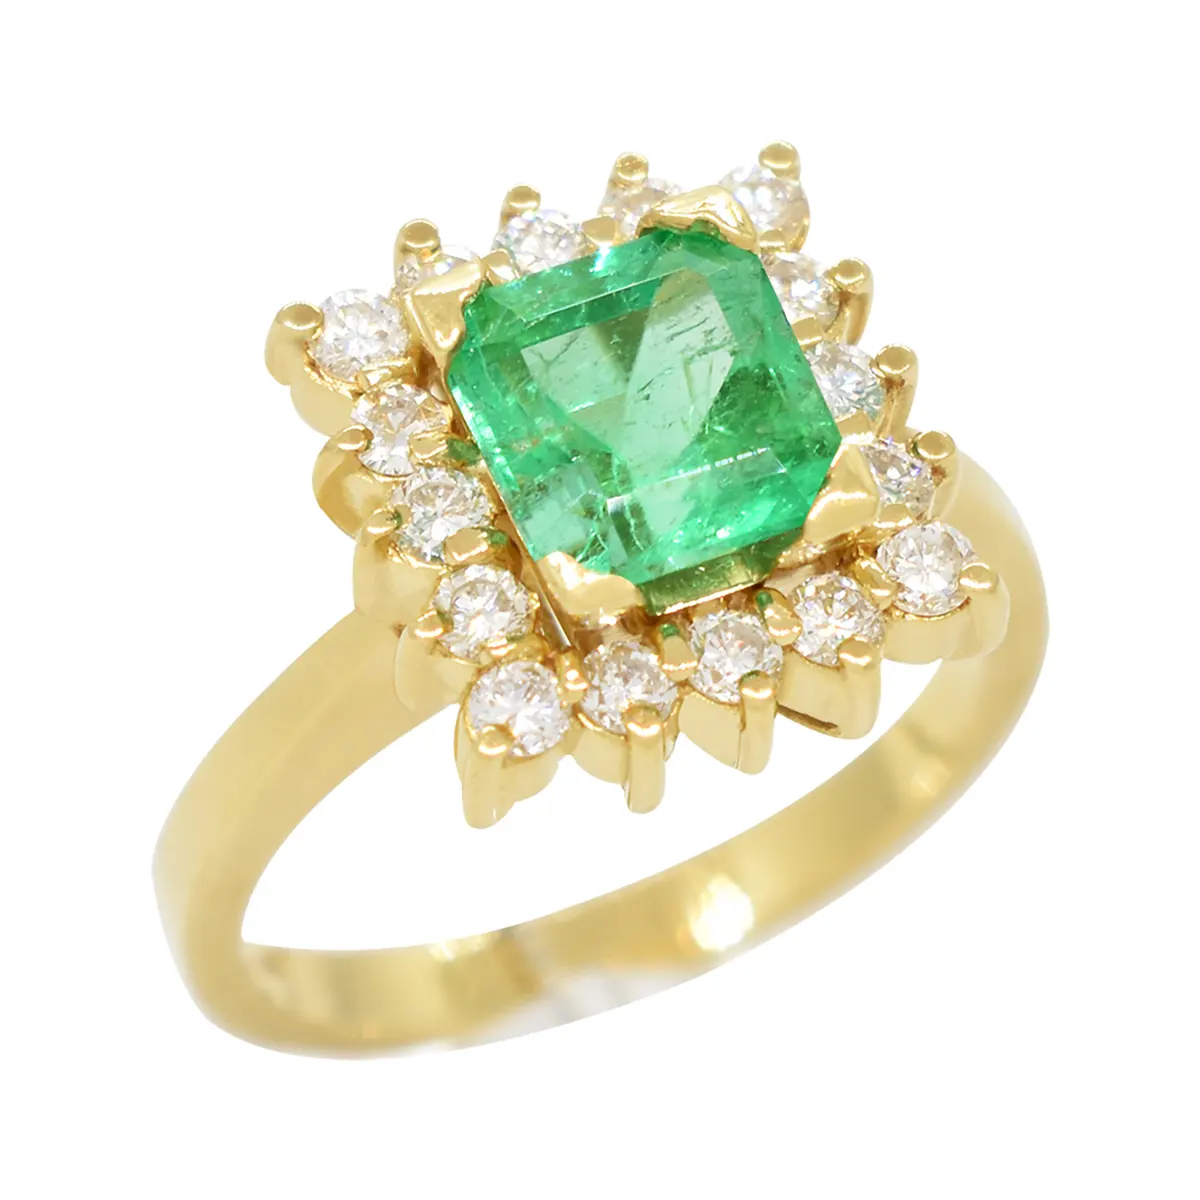 Emerald Cut Emerald Set in 18K Gold Ring With Diamond Halo in Cocktail Ring Style